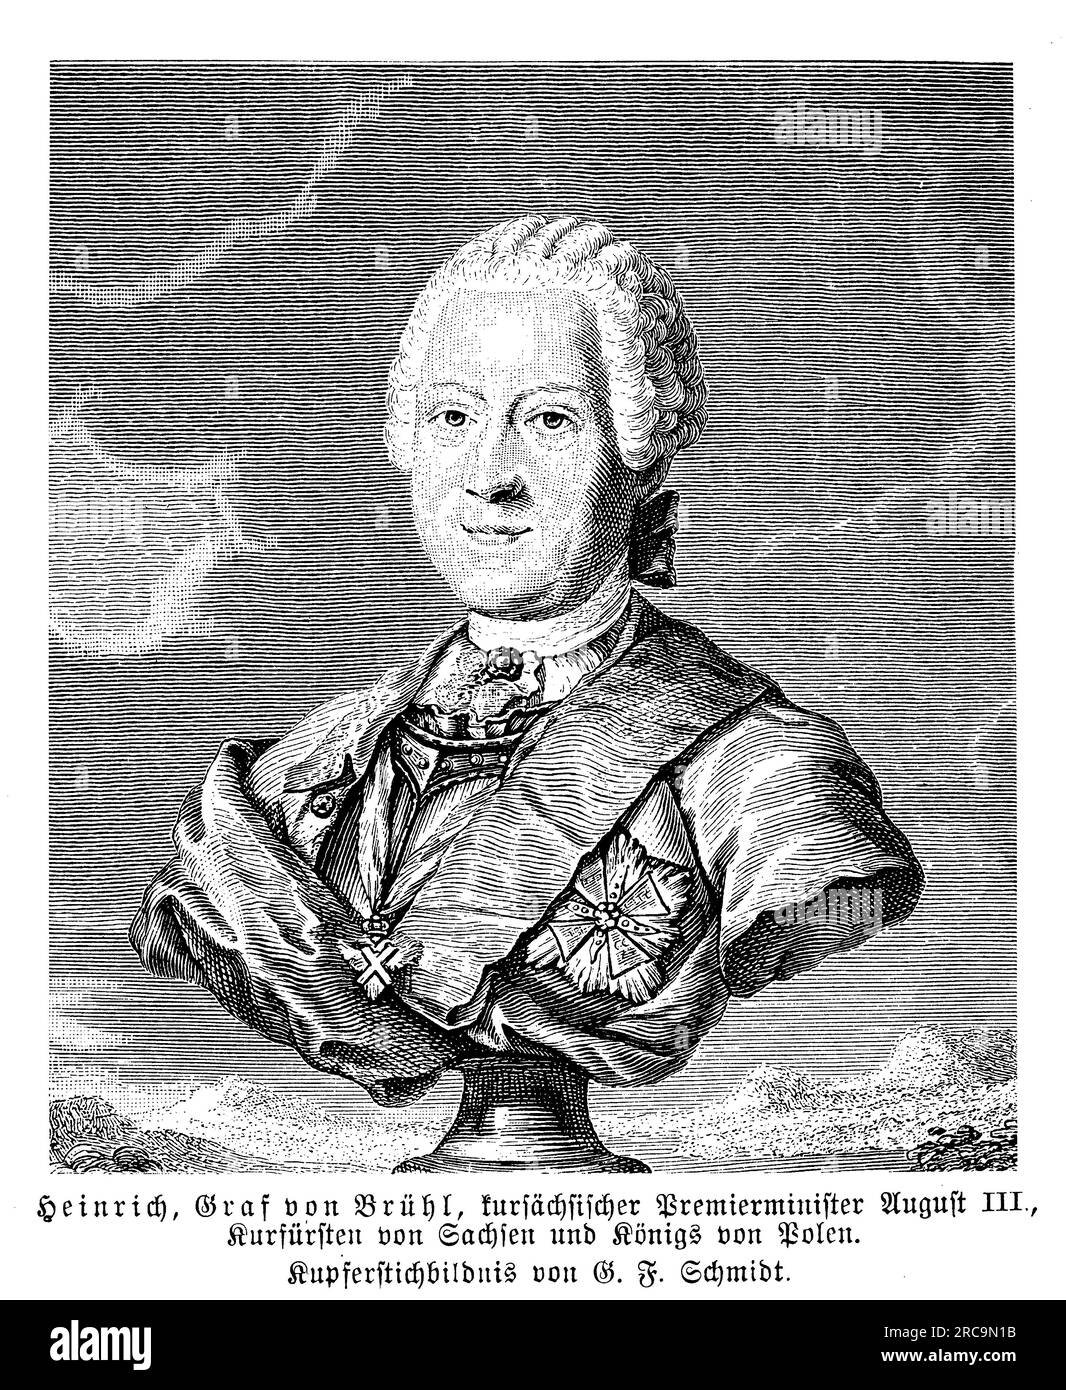 Portrit of Heinrich Graf von Bruehl, born on August 13, 1700, was a prominent figure in the court of the Electorate of Saxony during the 18th century. He served as the Prime Minister and Minister of State for Saxony under the rule of Augustus III. Bruehl was known for his opulent lifestyle and lavish taste, earning him a reputation for extravagance. He played a significant role in shaping the cultural and artistic landscape of Saxony, particularly in Dresden, where he sponsored numerous architectural projects and cultural endeavors. Brühl's tenure as a minister was marked by his efforts to str Stock Photo